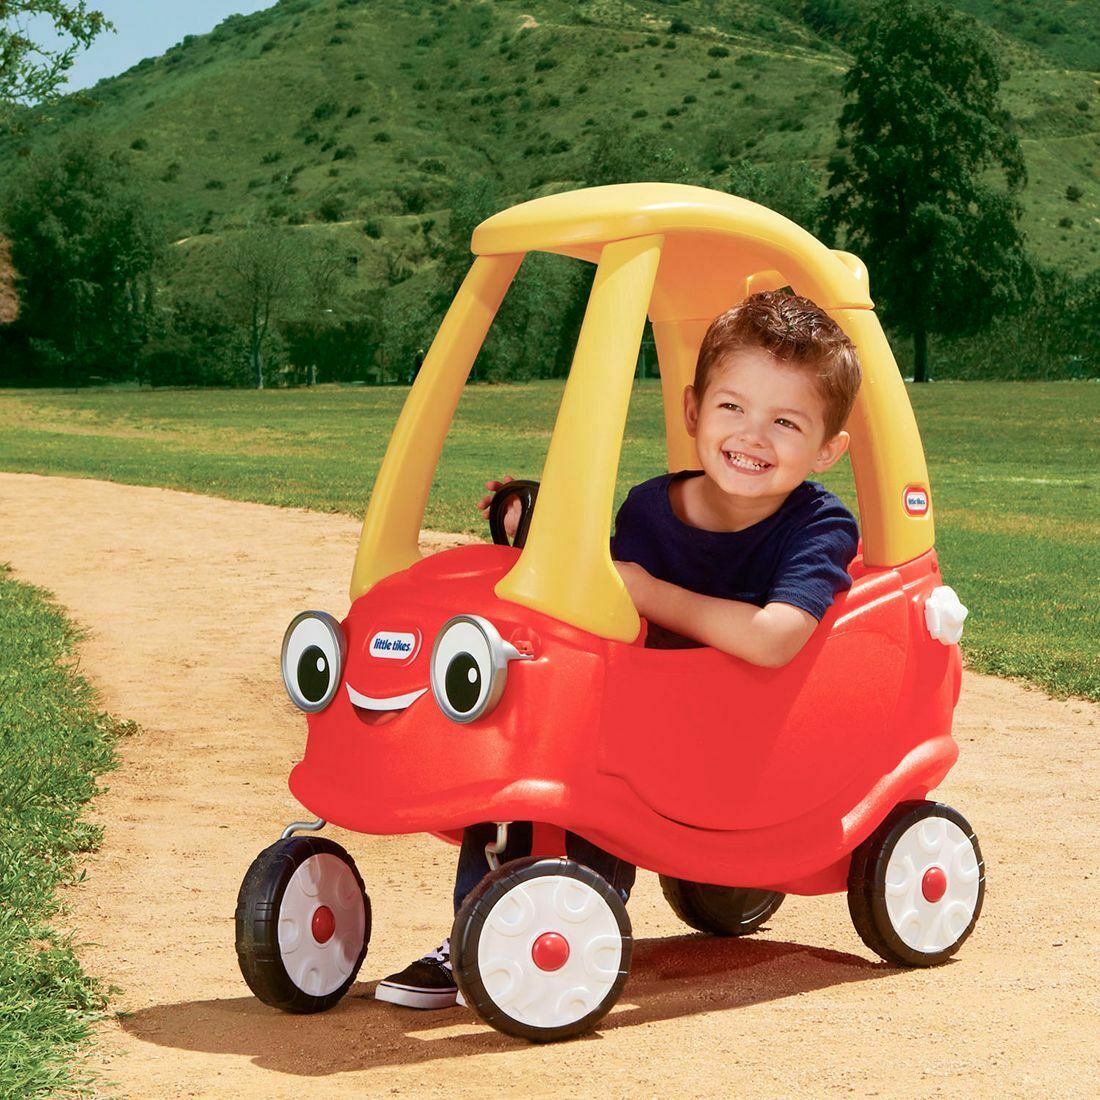 Little Tikes Cozy Coupe Ride On Toy for Toddlers and Kids! - image 2 of 5